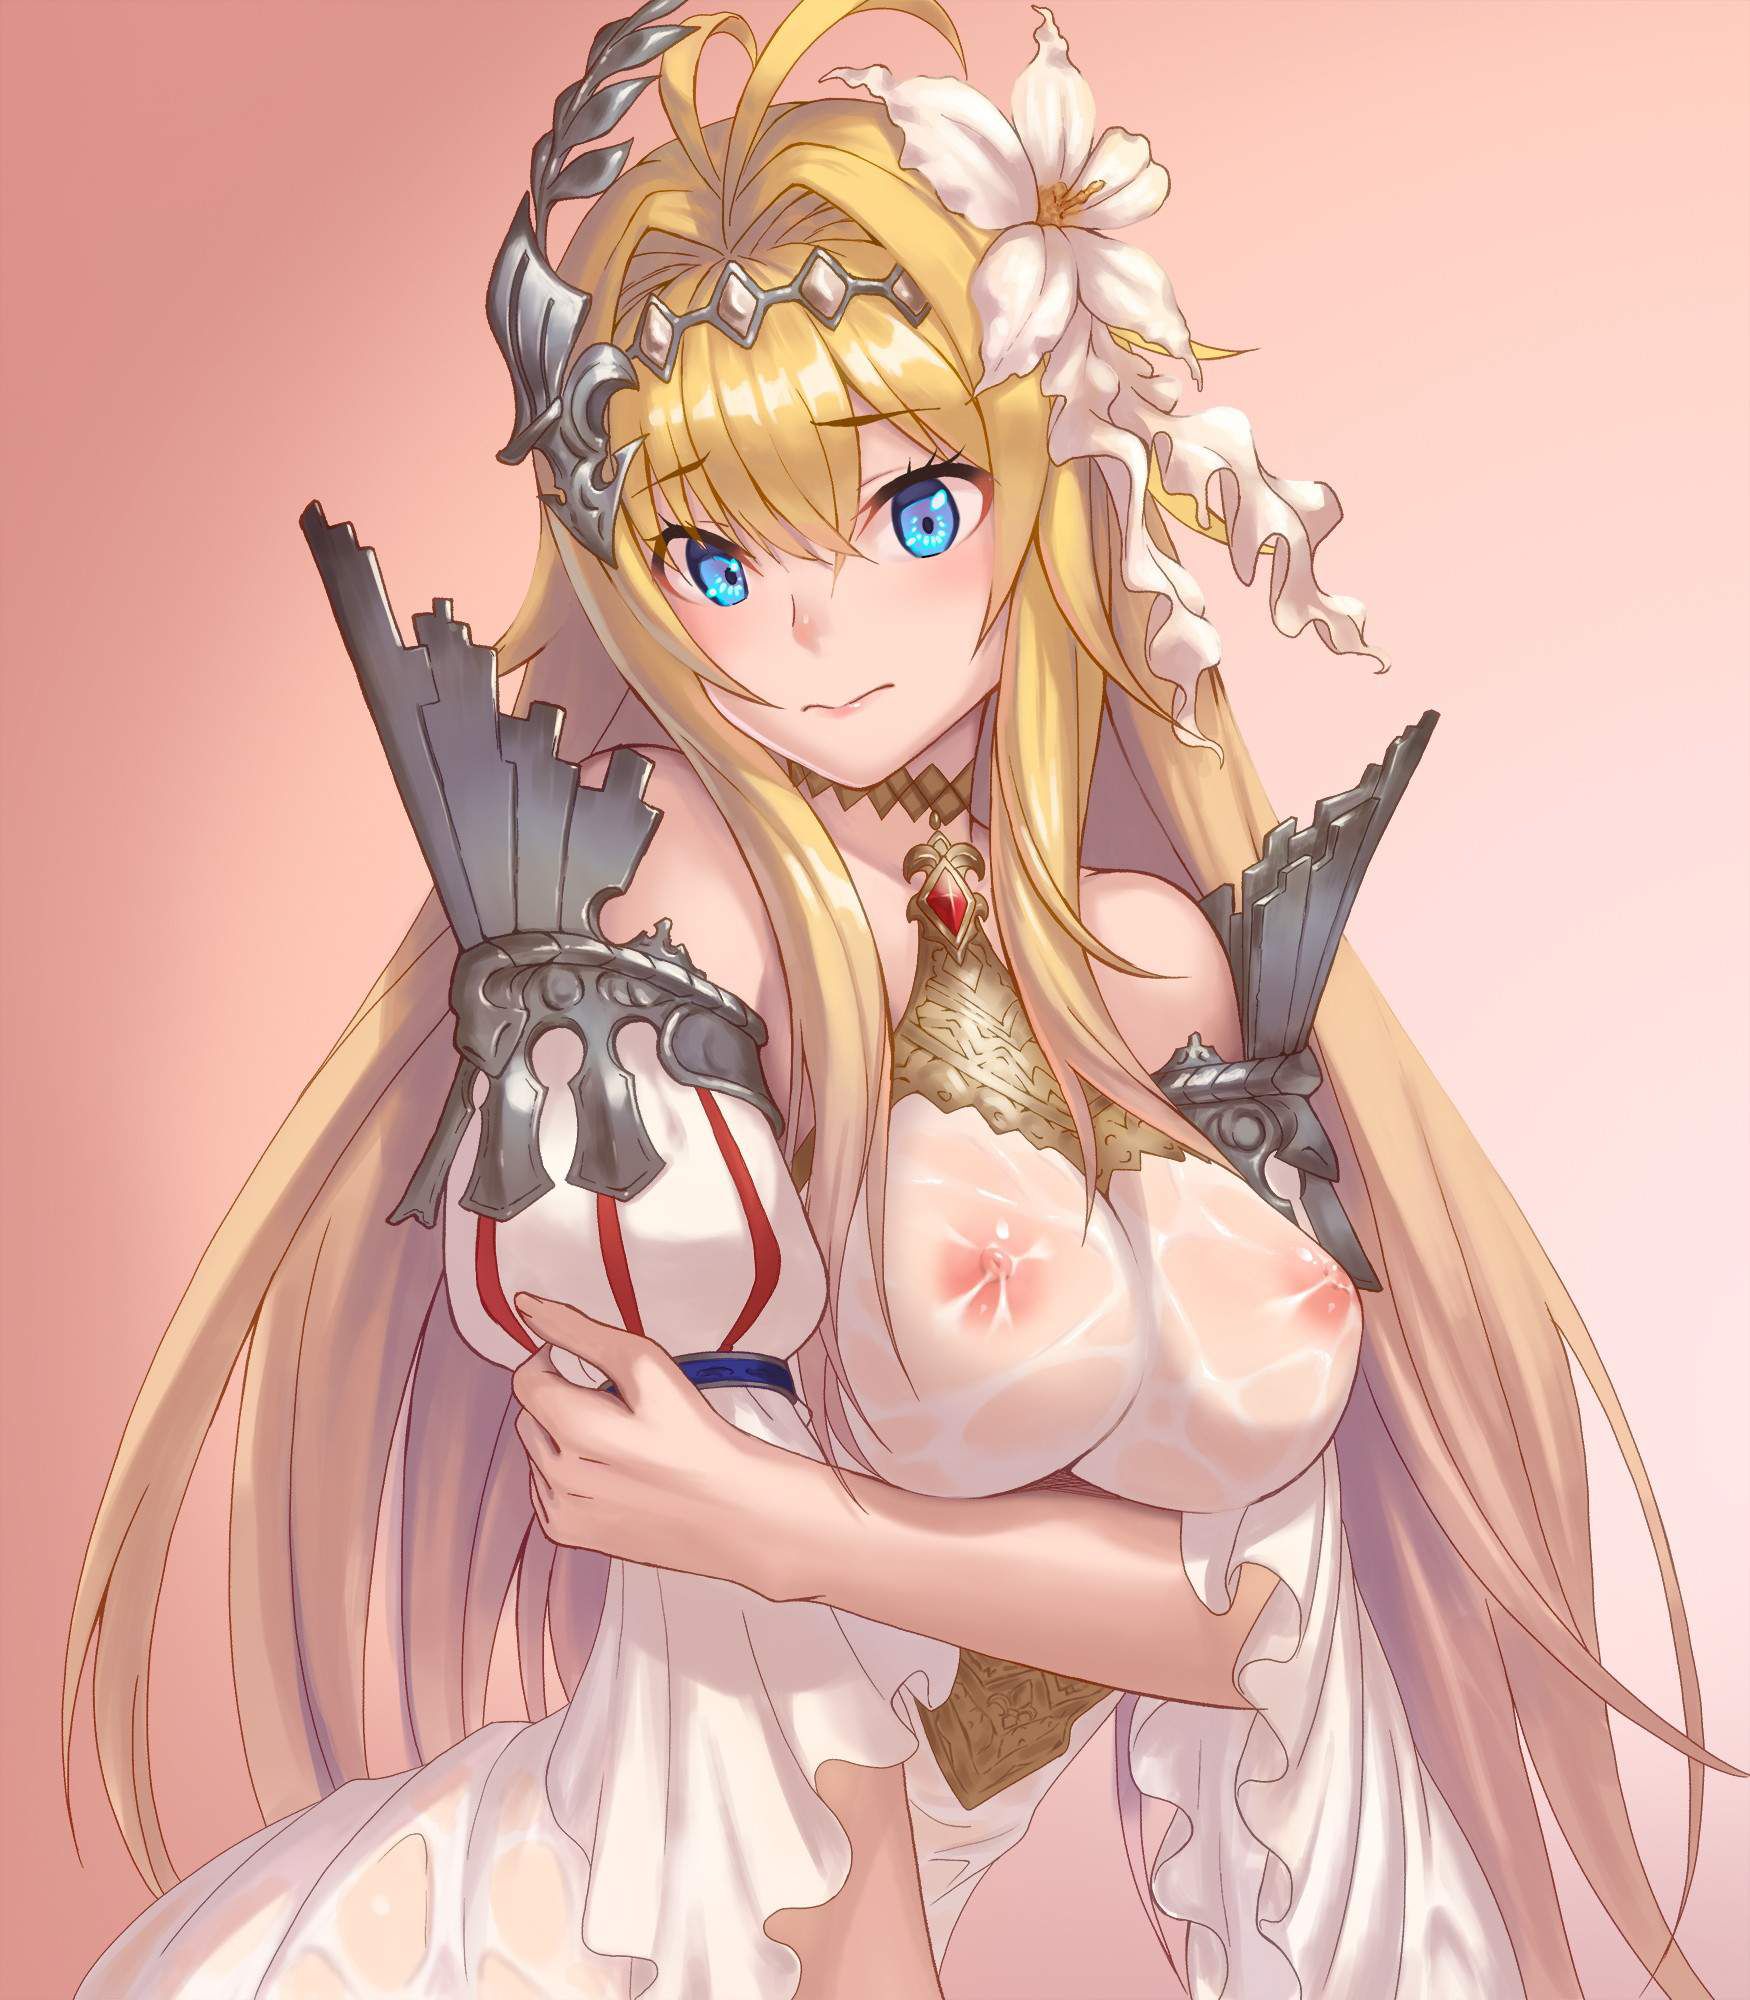 Jeanne Darc's free erotic image summary that makes you happy just by looking at it! (Granblue Fantasy) 4